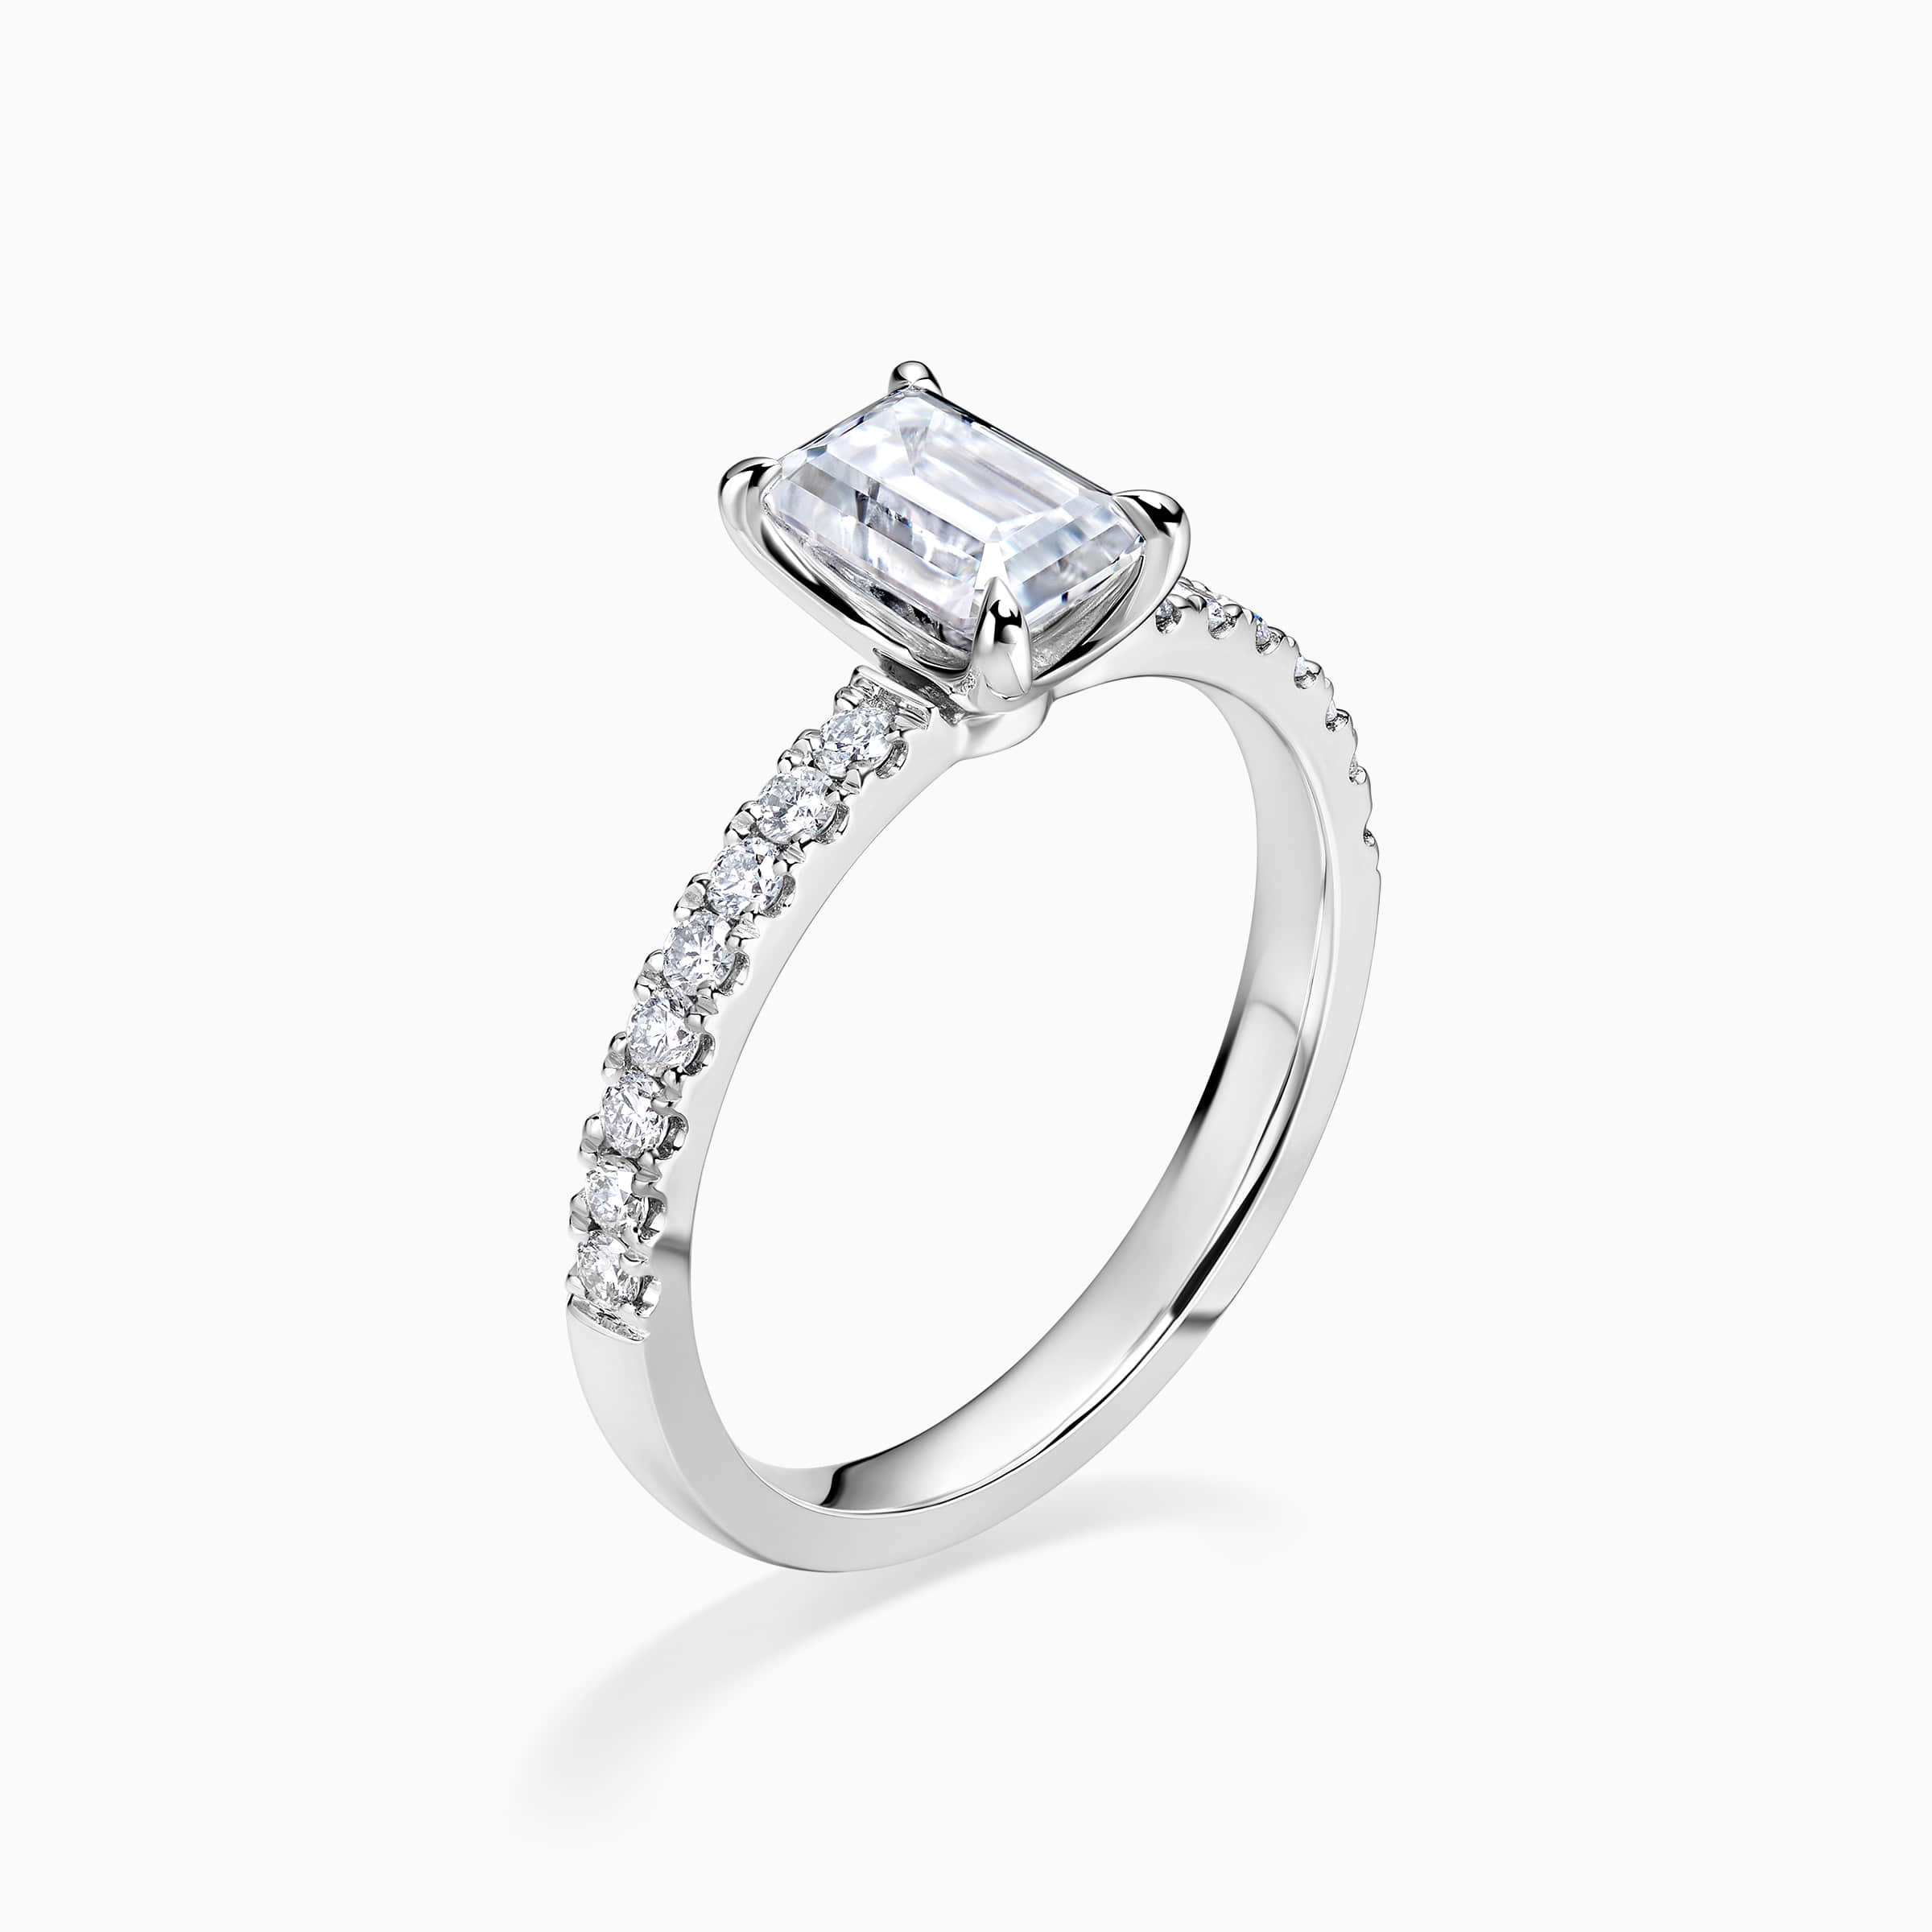 Darry Ring emerald cut promise ring front view